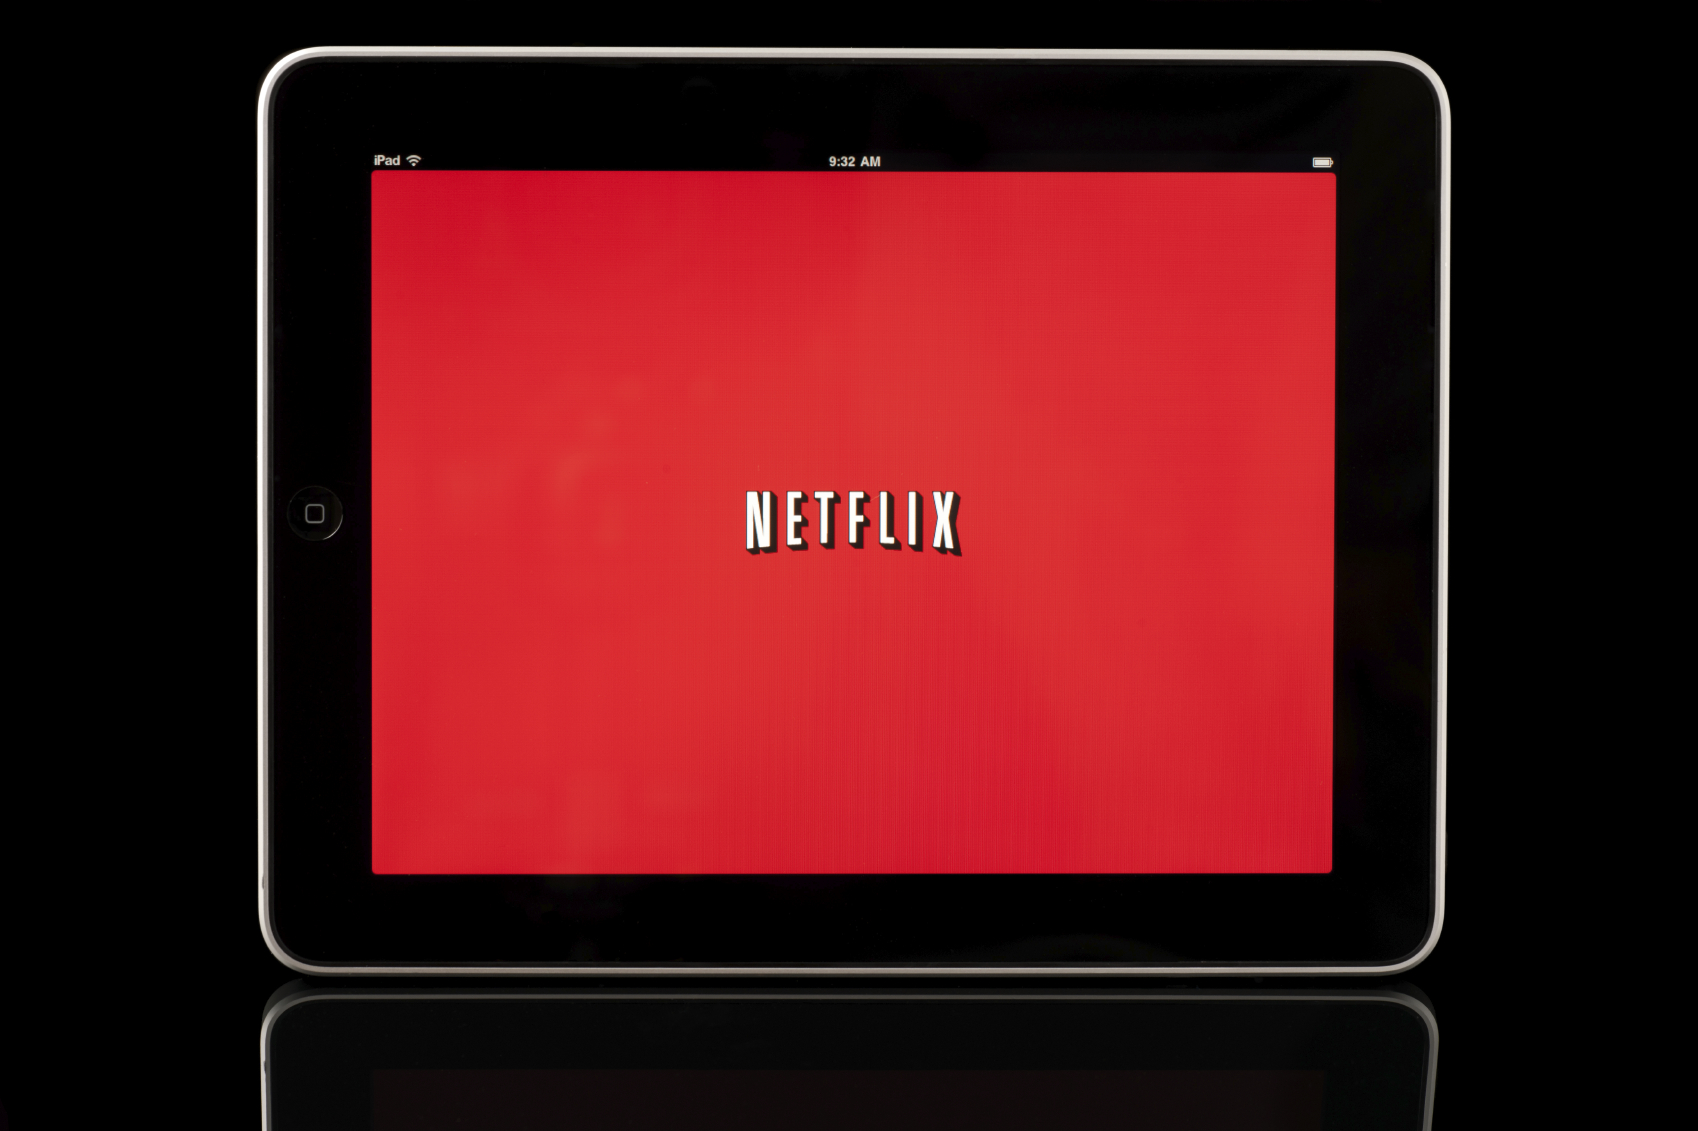 what are the system requirements for netflix streaming